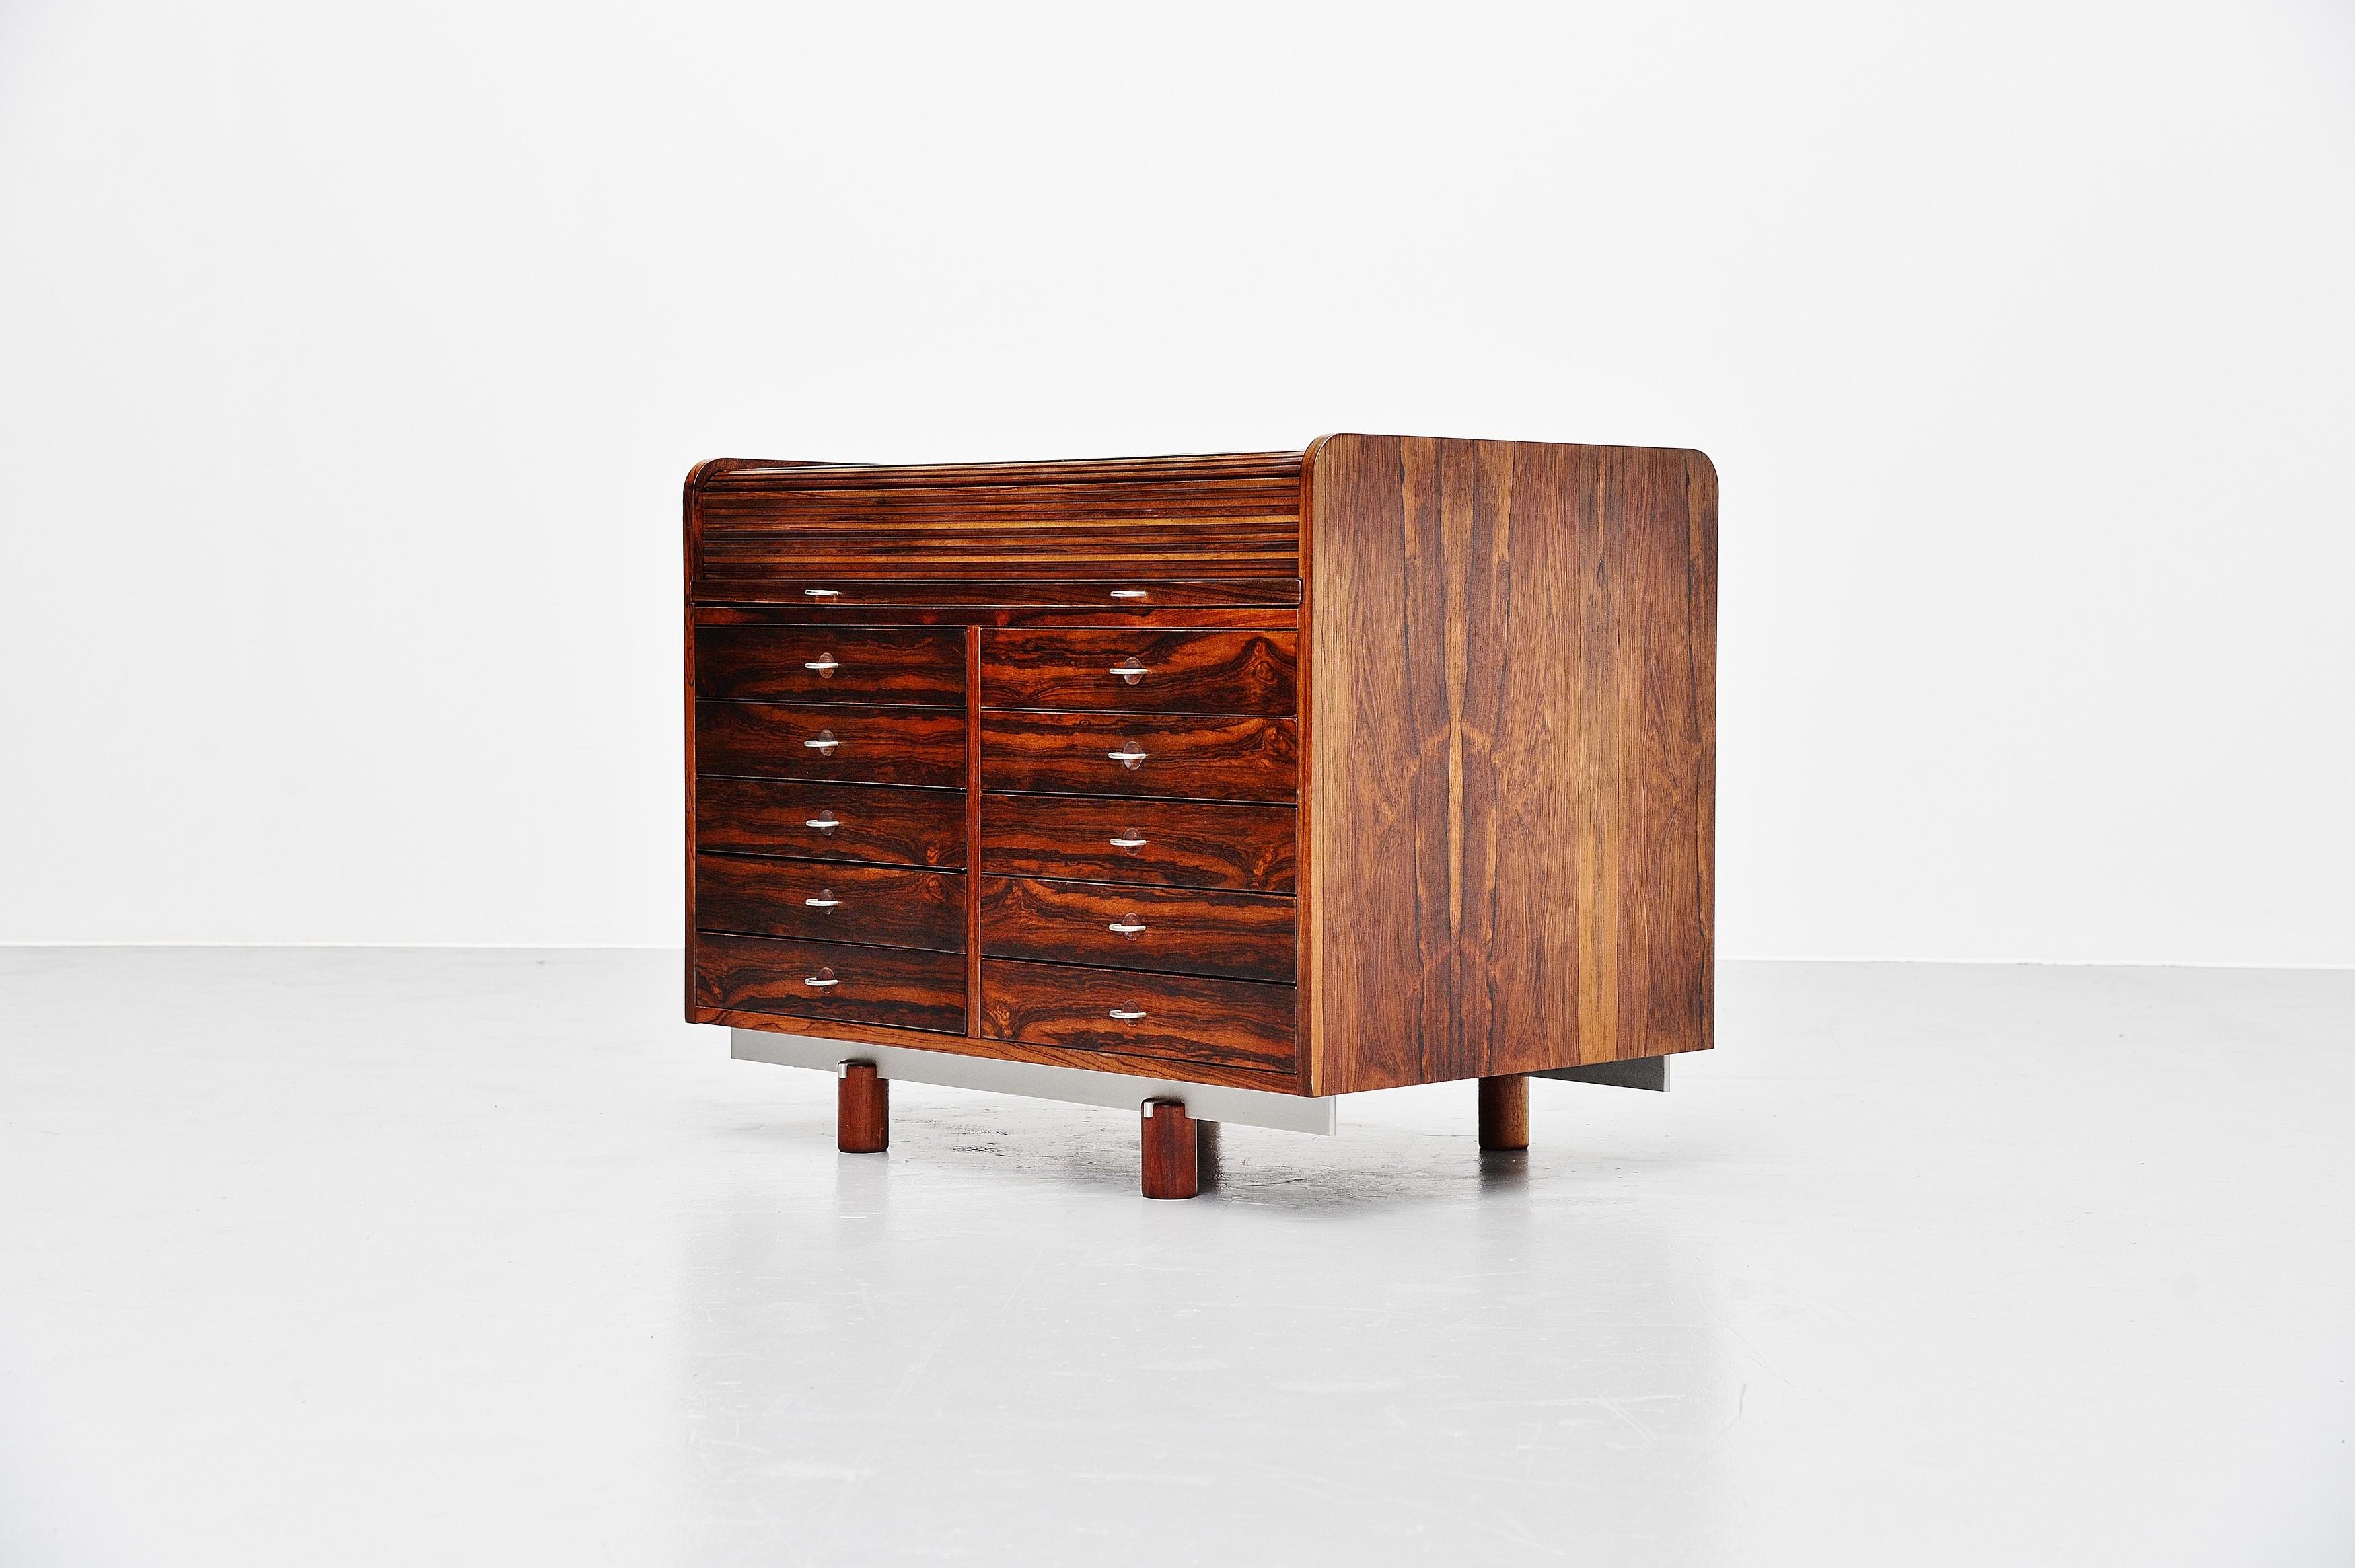 Rare and unusual roll-top desk model 804 designed by Gianfranco Frattini and manufactured by Bernini, Italy 1964. The desk is made of rosewood veneer and has a very nice shape. This was fantastic made and a very functional design. By pulling the